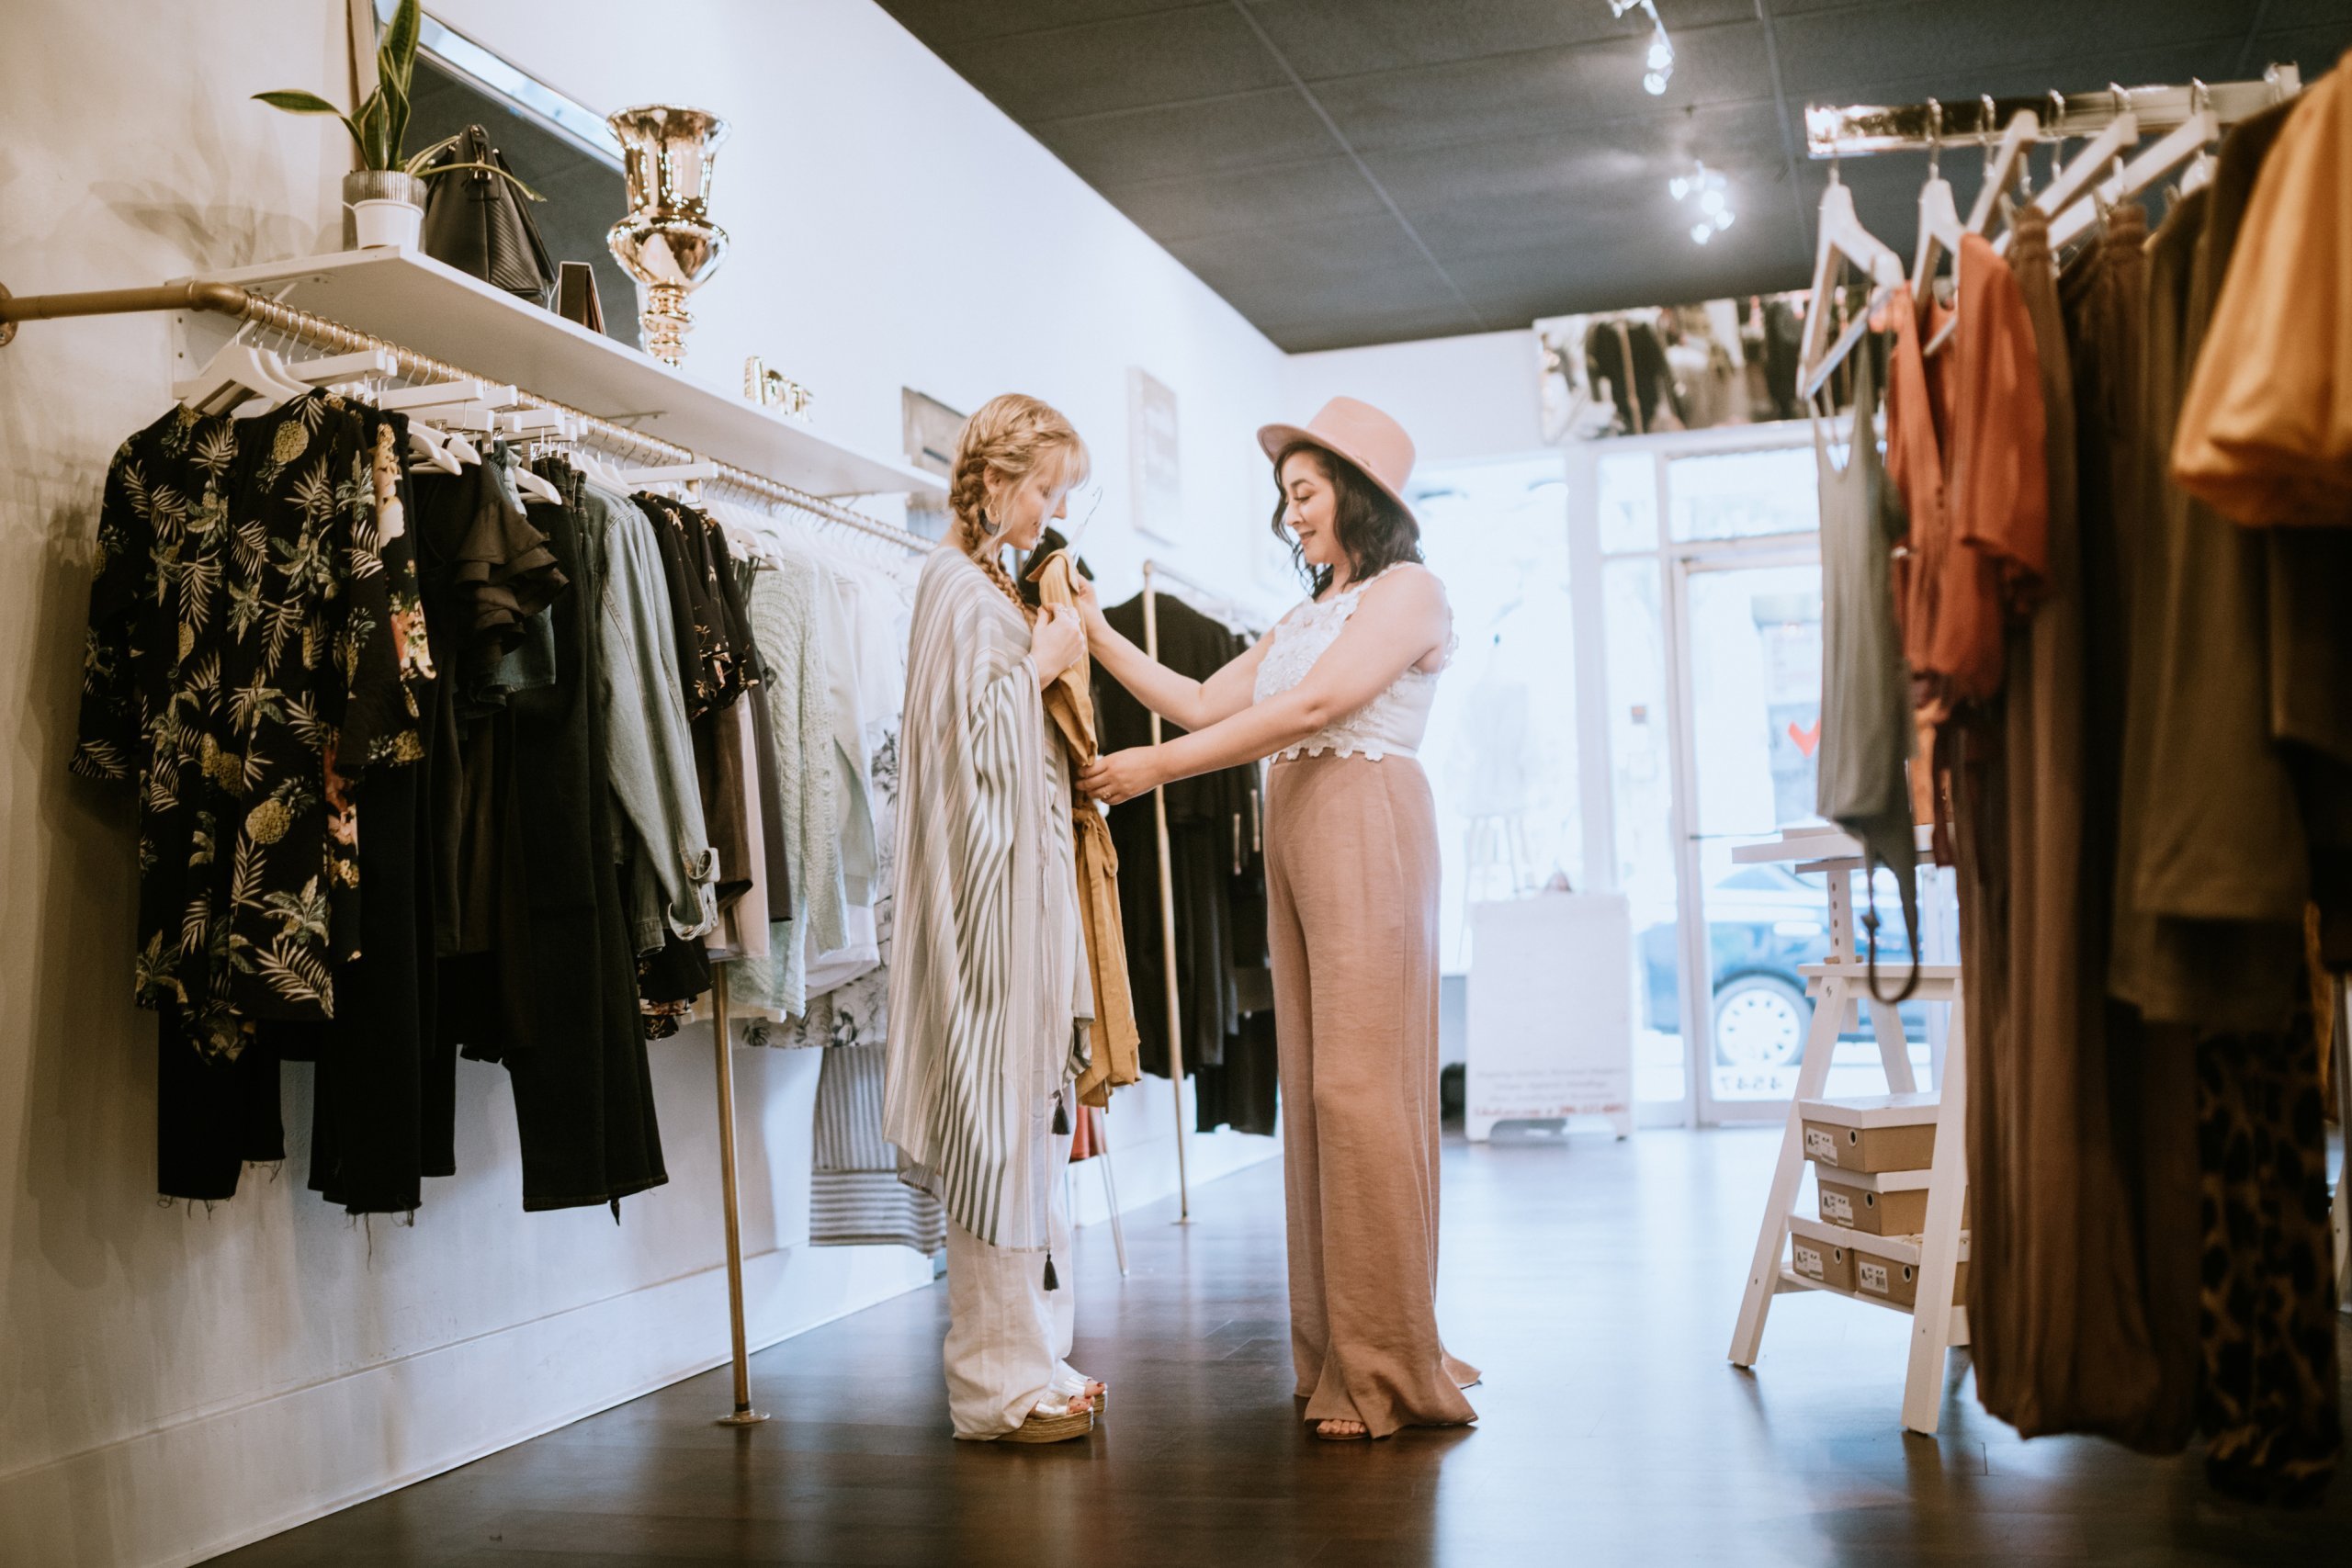 Things You Need to Start a Clothing Boutique